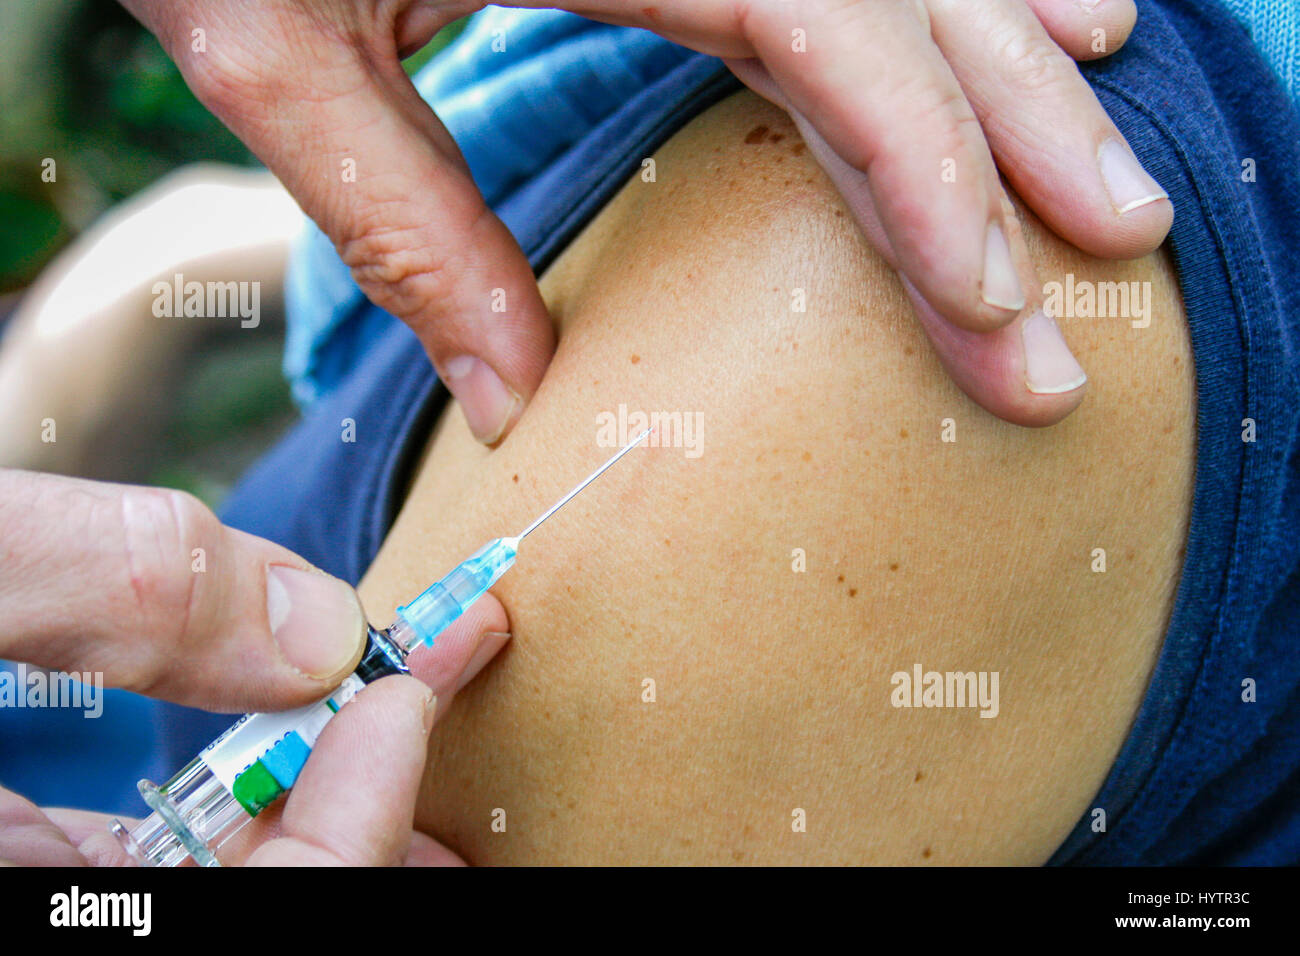 Doctor takes syringe out of arm after injection Stock Photo